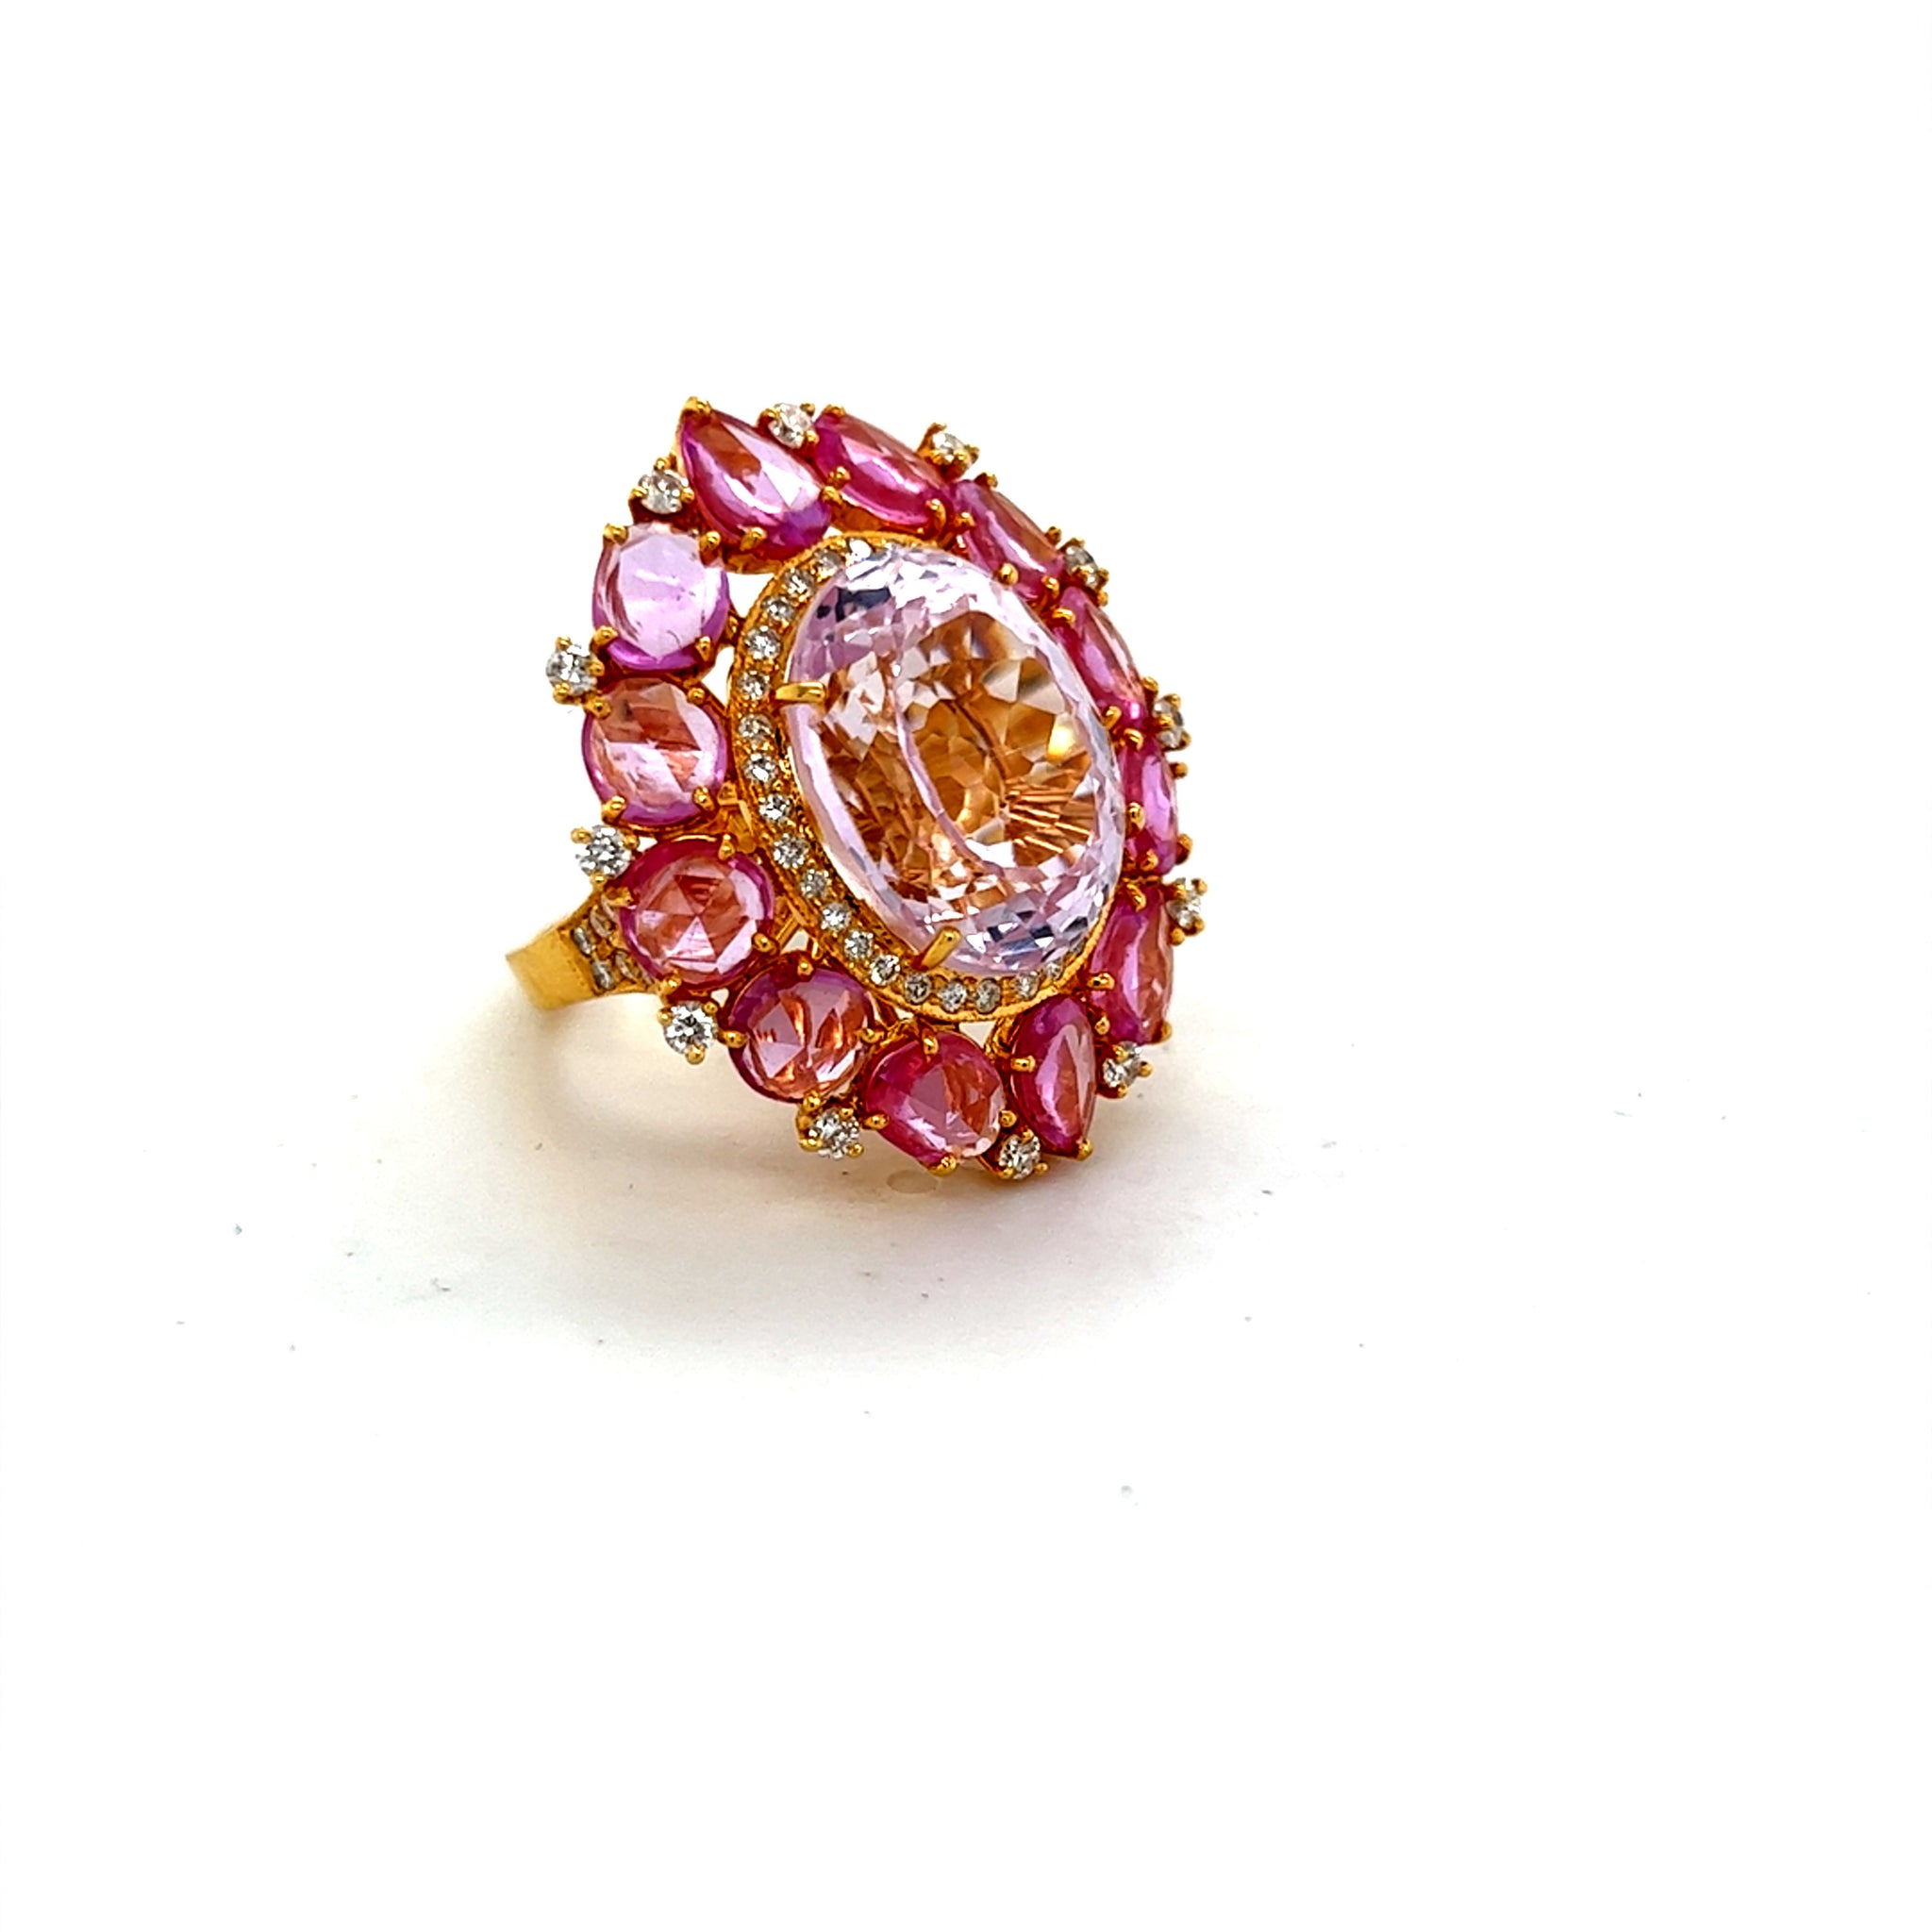 One-of-a-Kind 18kt Gold Kunzite Cocktail Ring II